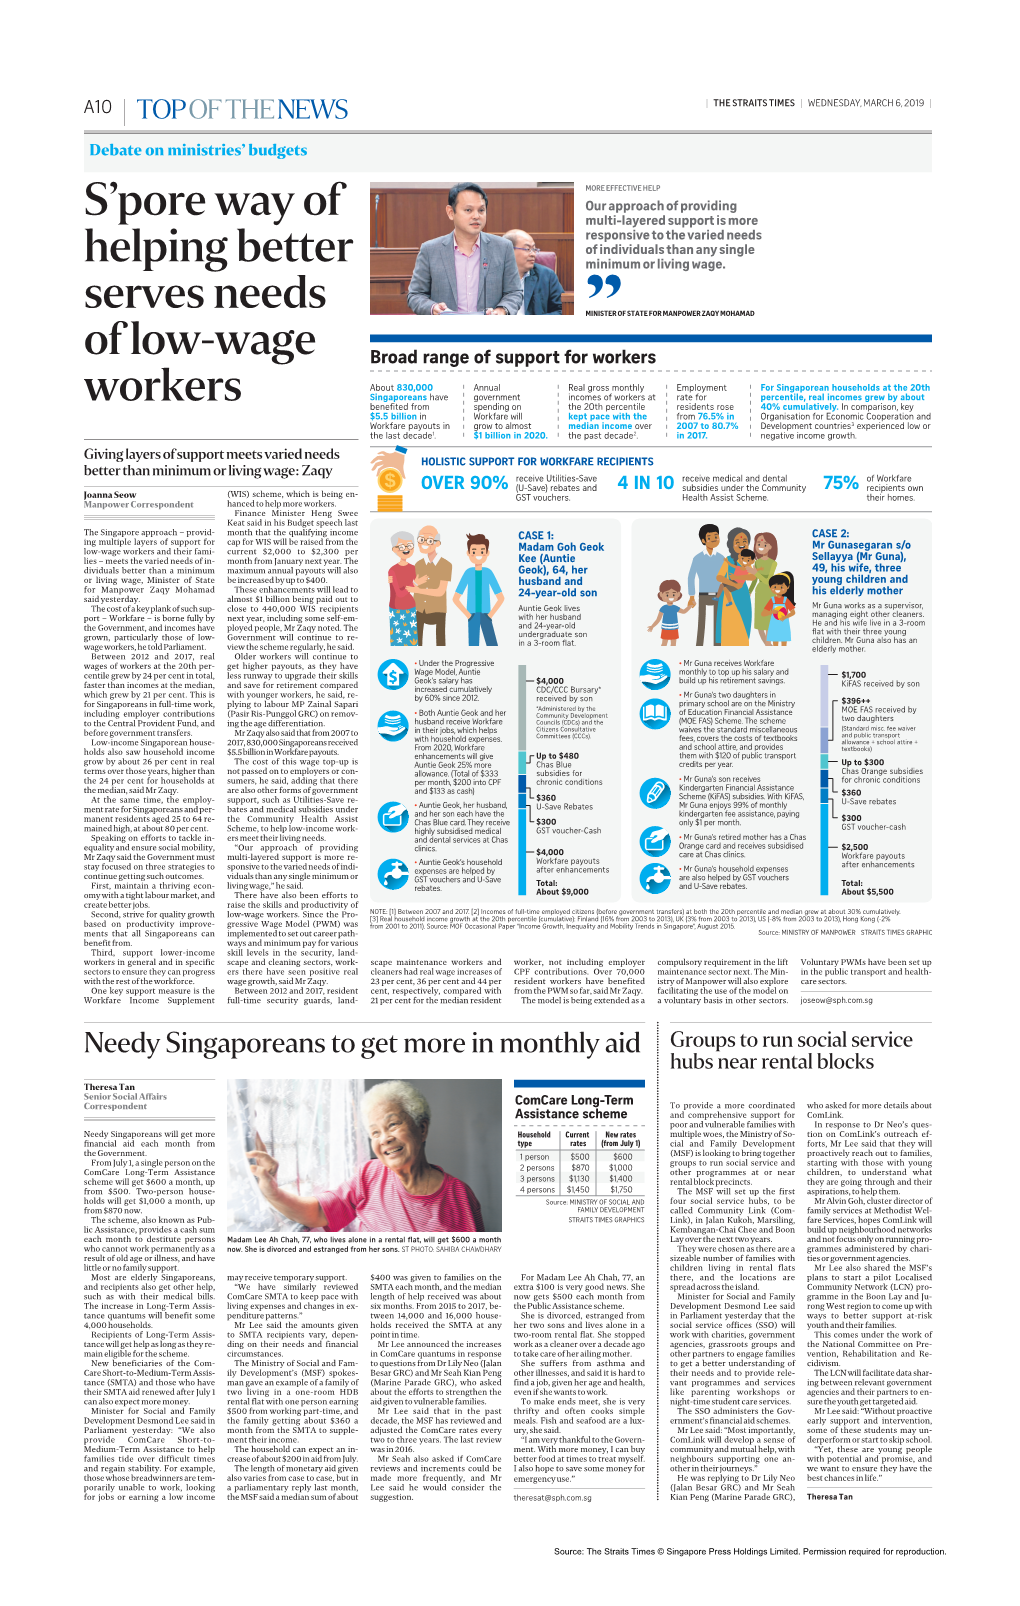 S'pore Way of Helping Better Serves Needs of Low-Wage Workers.Pdf